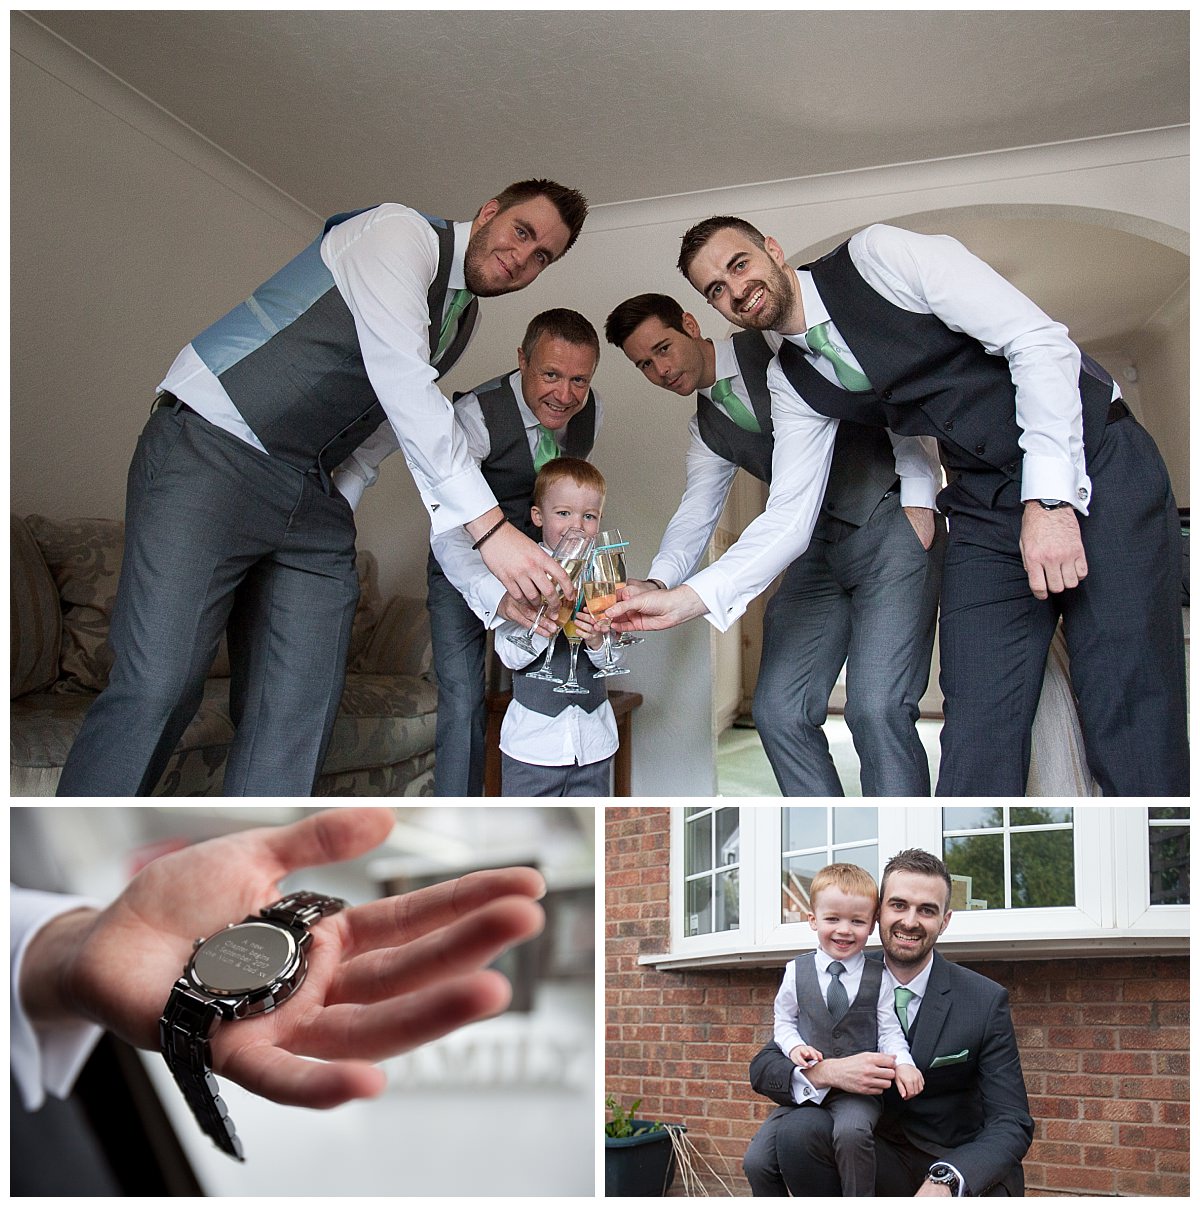 Groom with his groomsmen drinking champagne